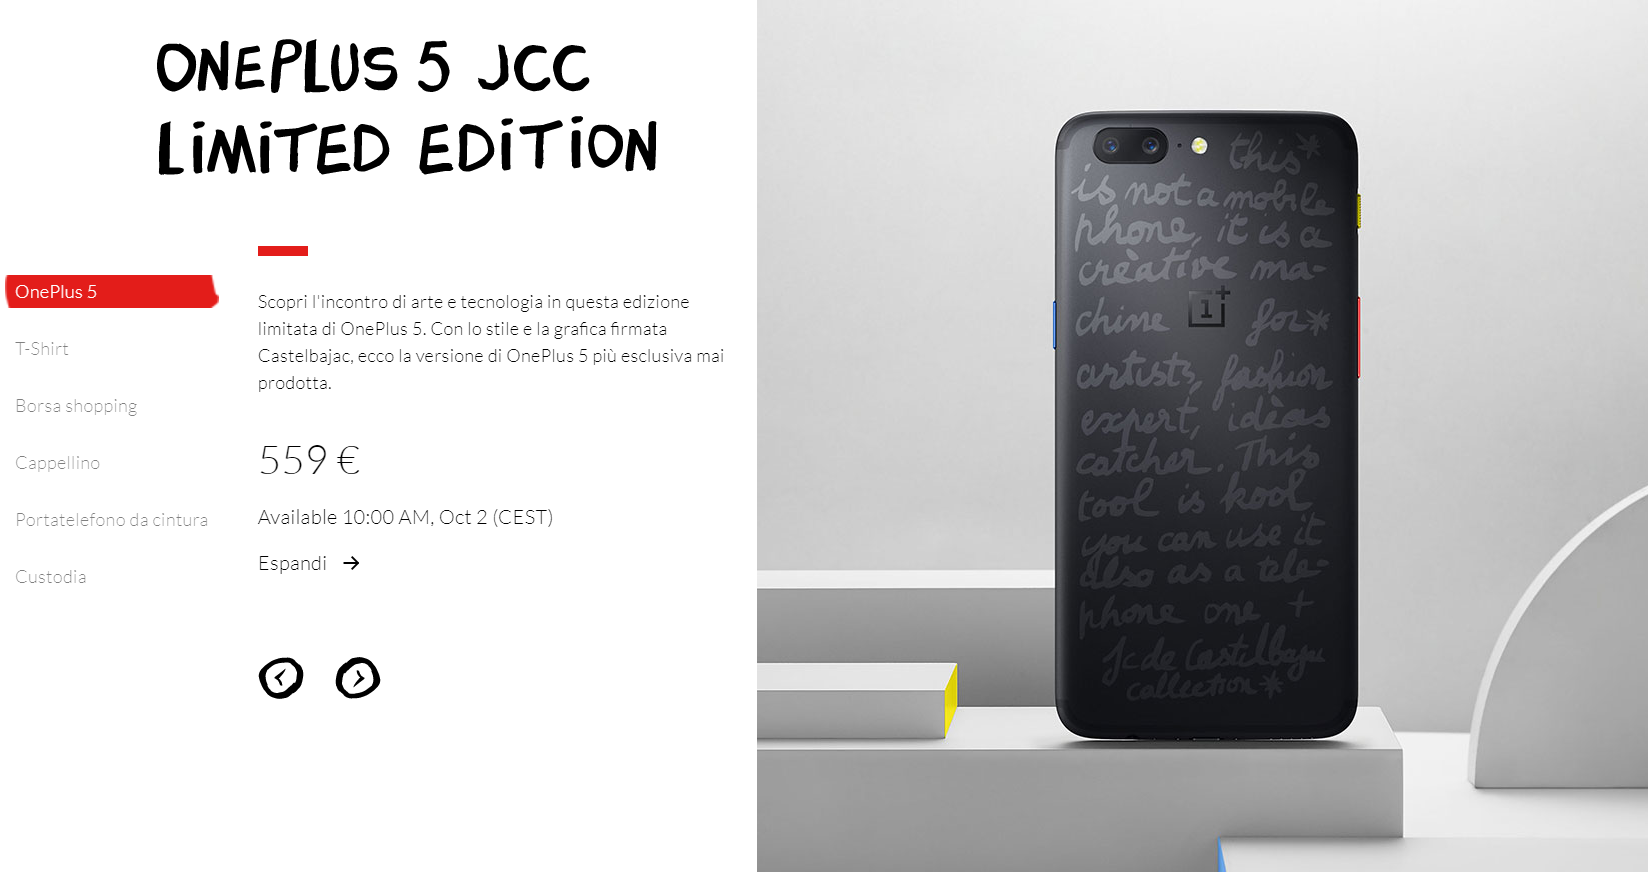 oneplus 5 jcc limited edition